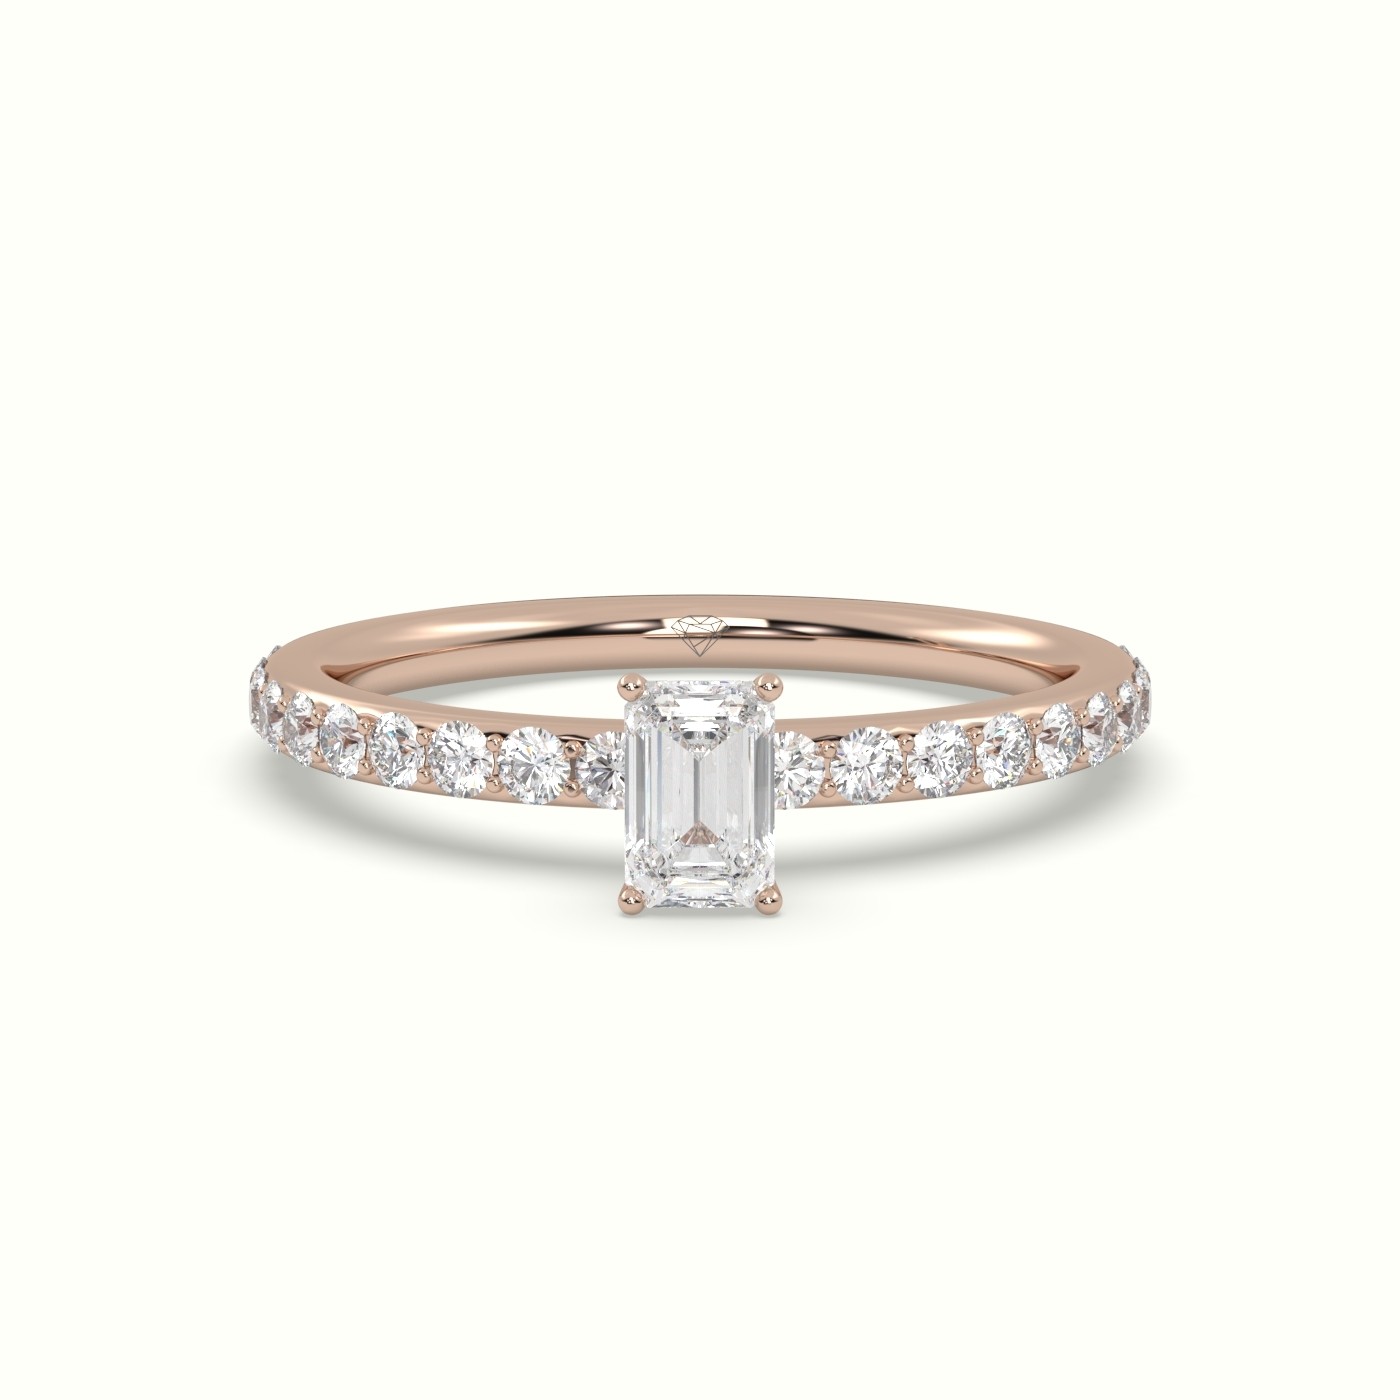 18K ROSE GOLD RADIANT DIAMOND ENGAGEMENT RING SET WITH 4 PRONG & SIDE STONES SET IN PAVE STYLE